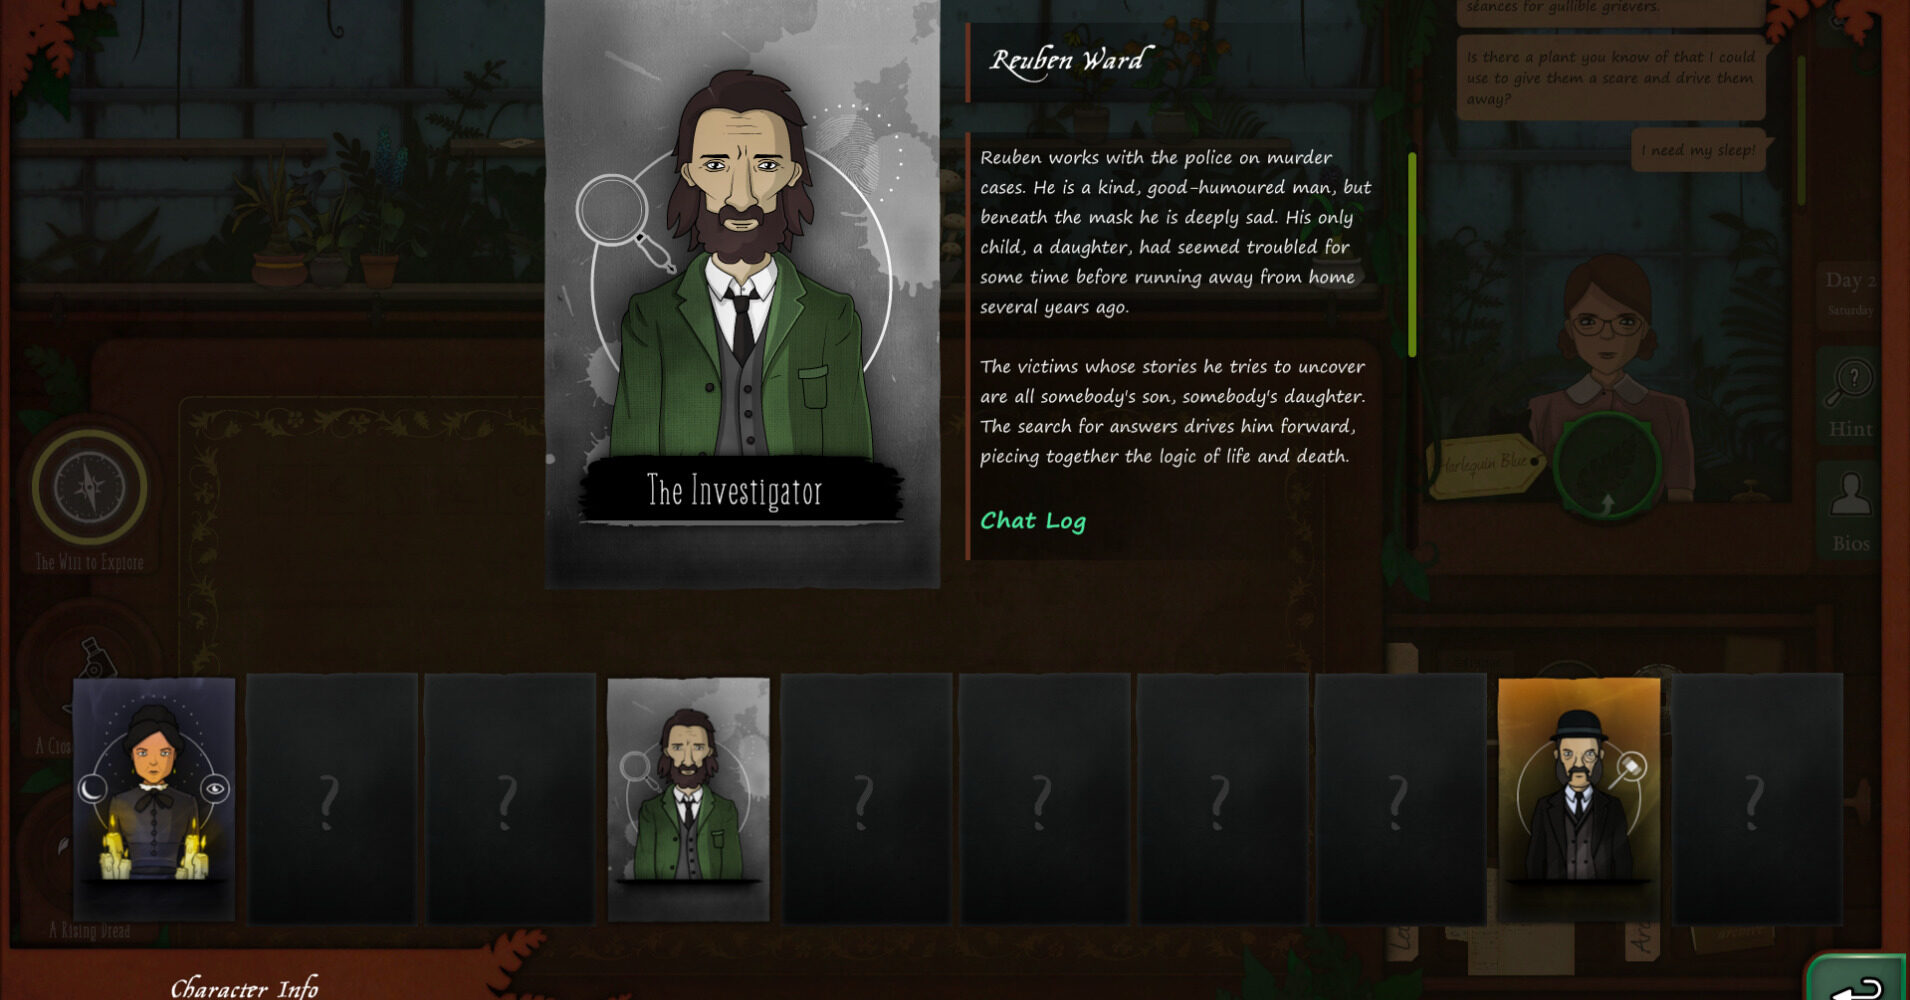 Strange Horticulture Game news indie Game Fans News